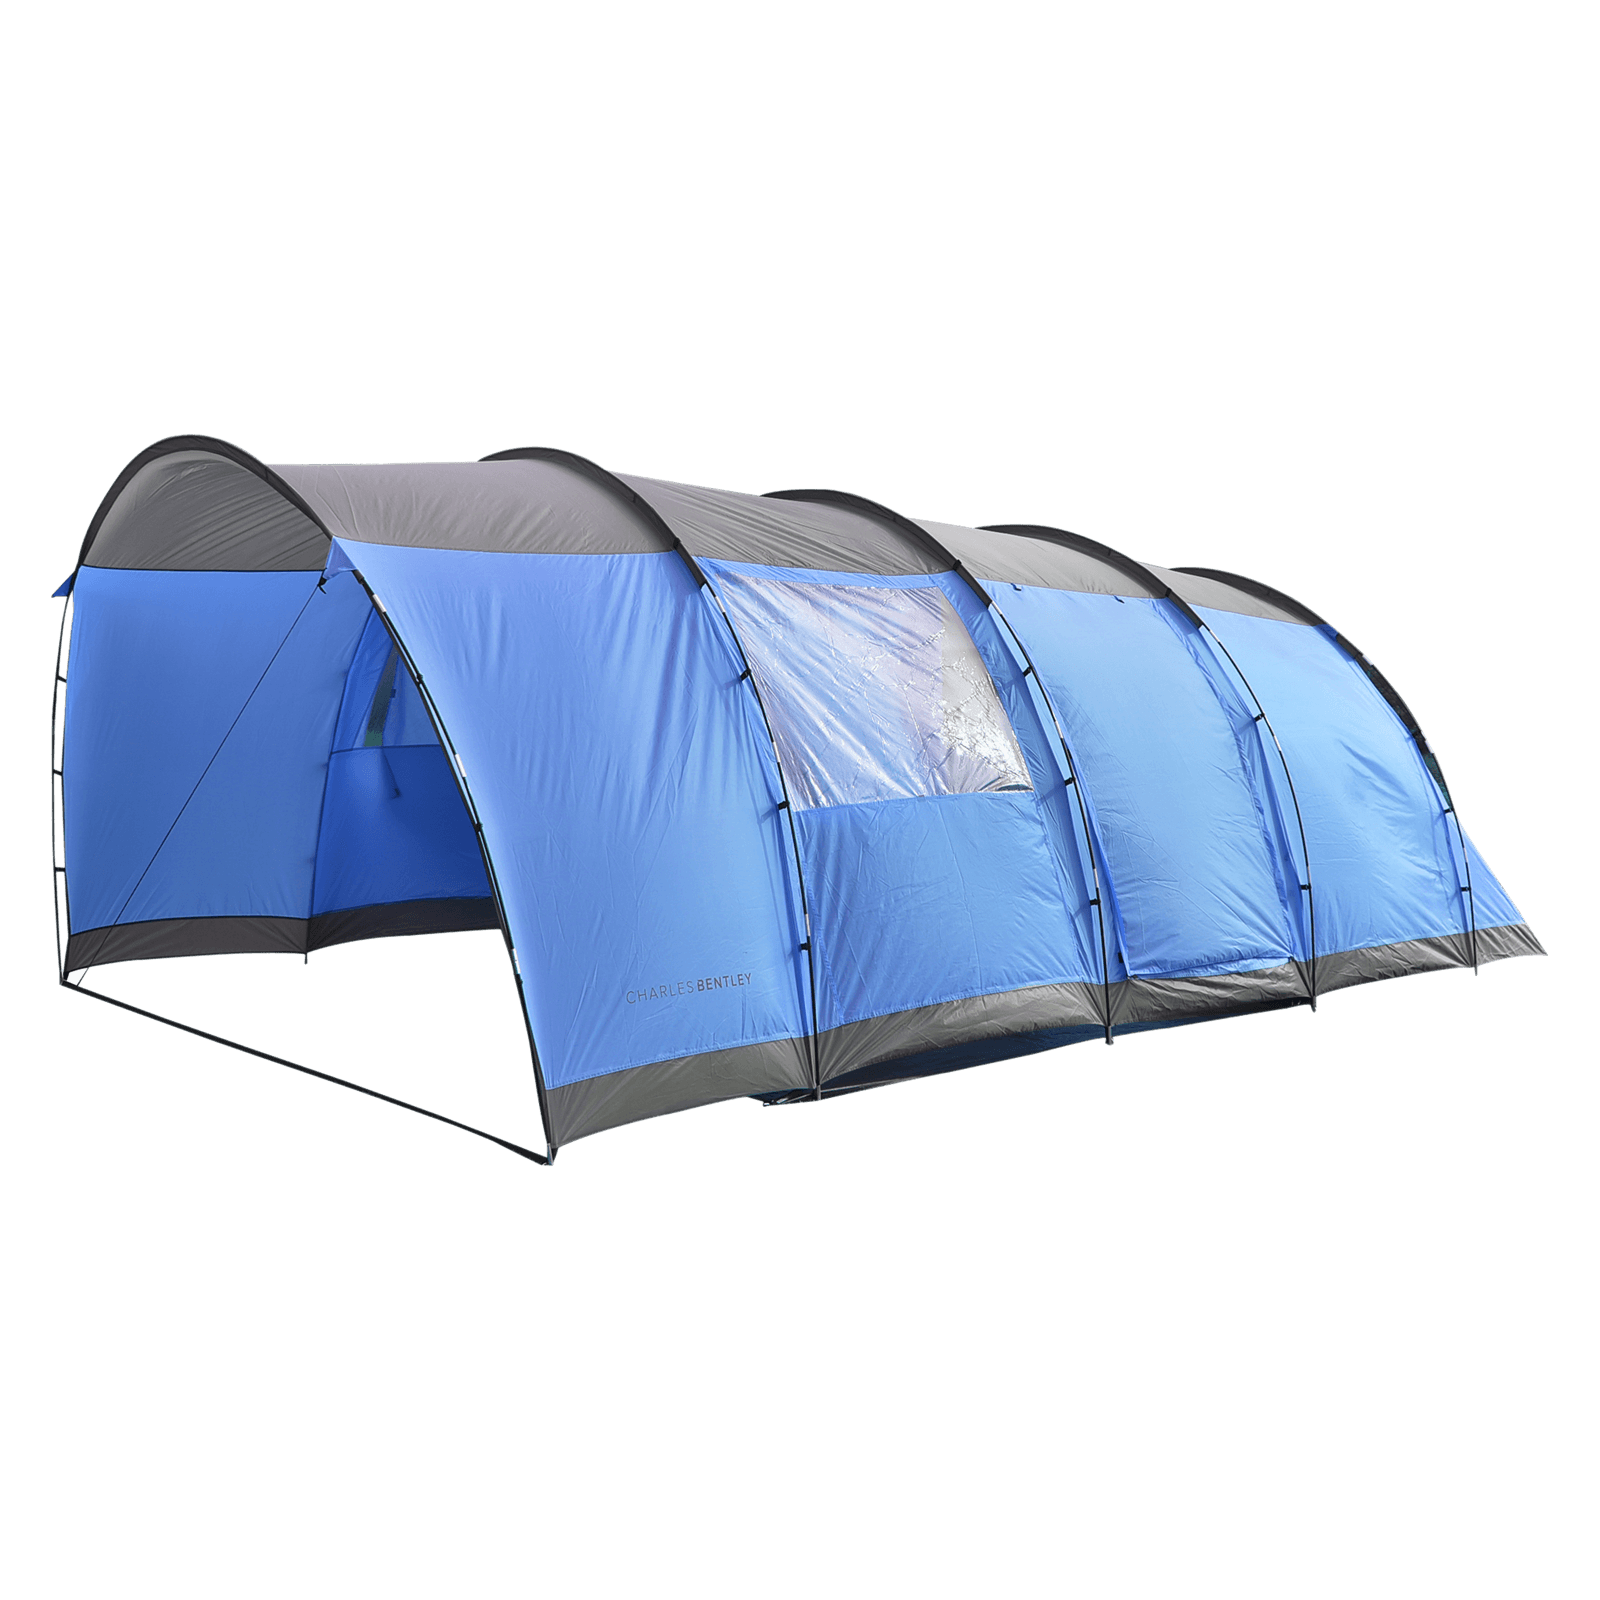 Charles Bentley 6 Person Camping Tunnel Tent - Blue